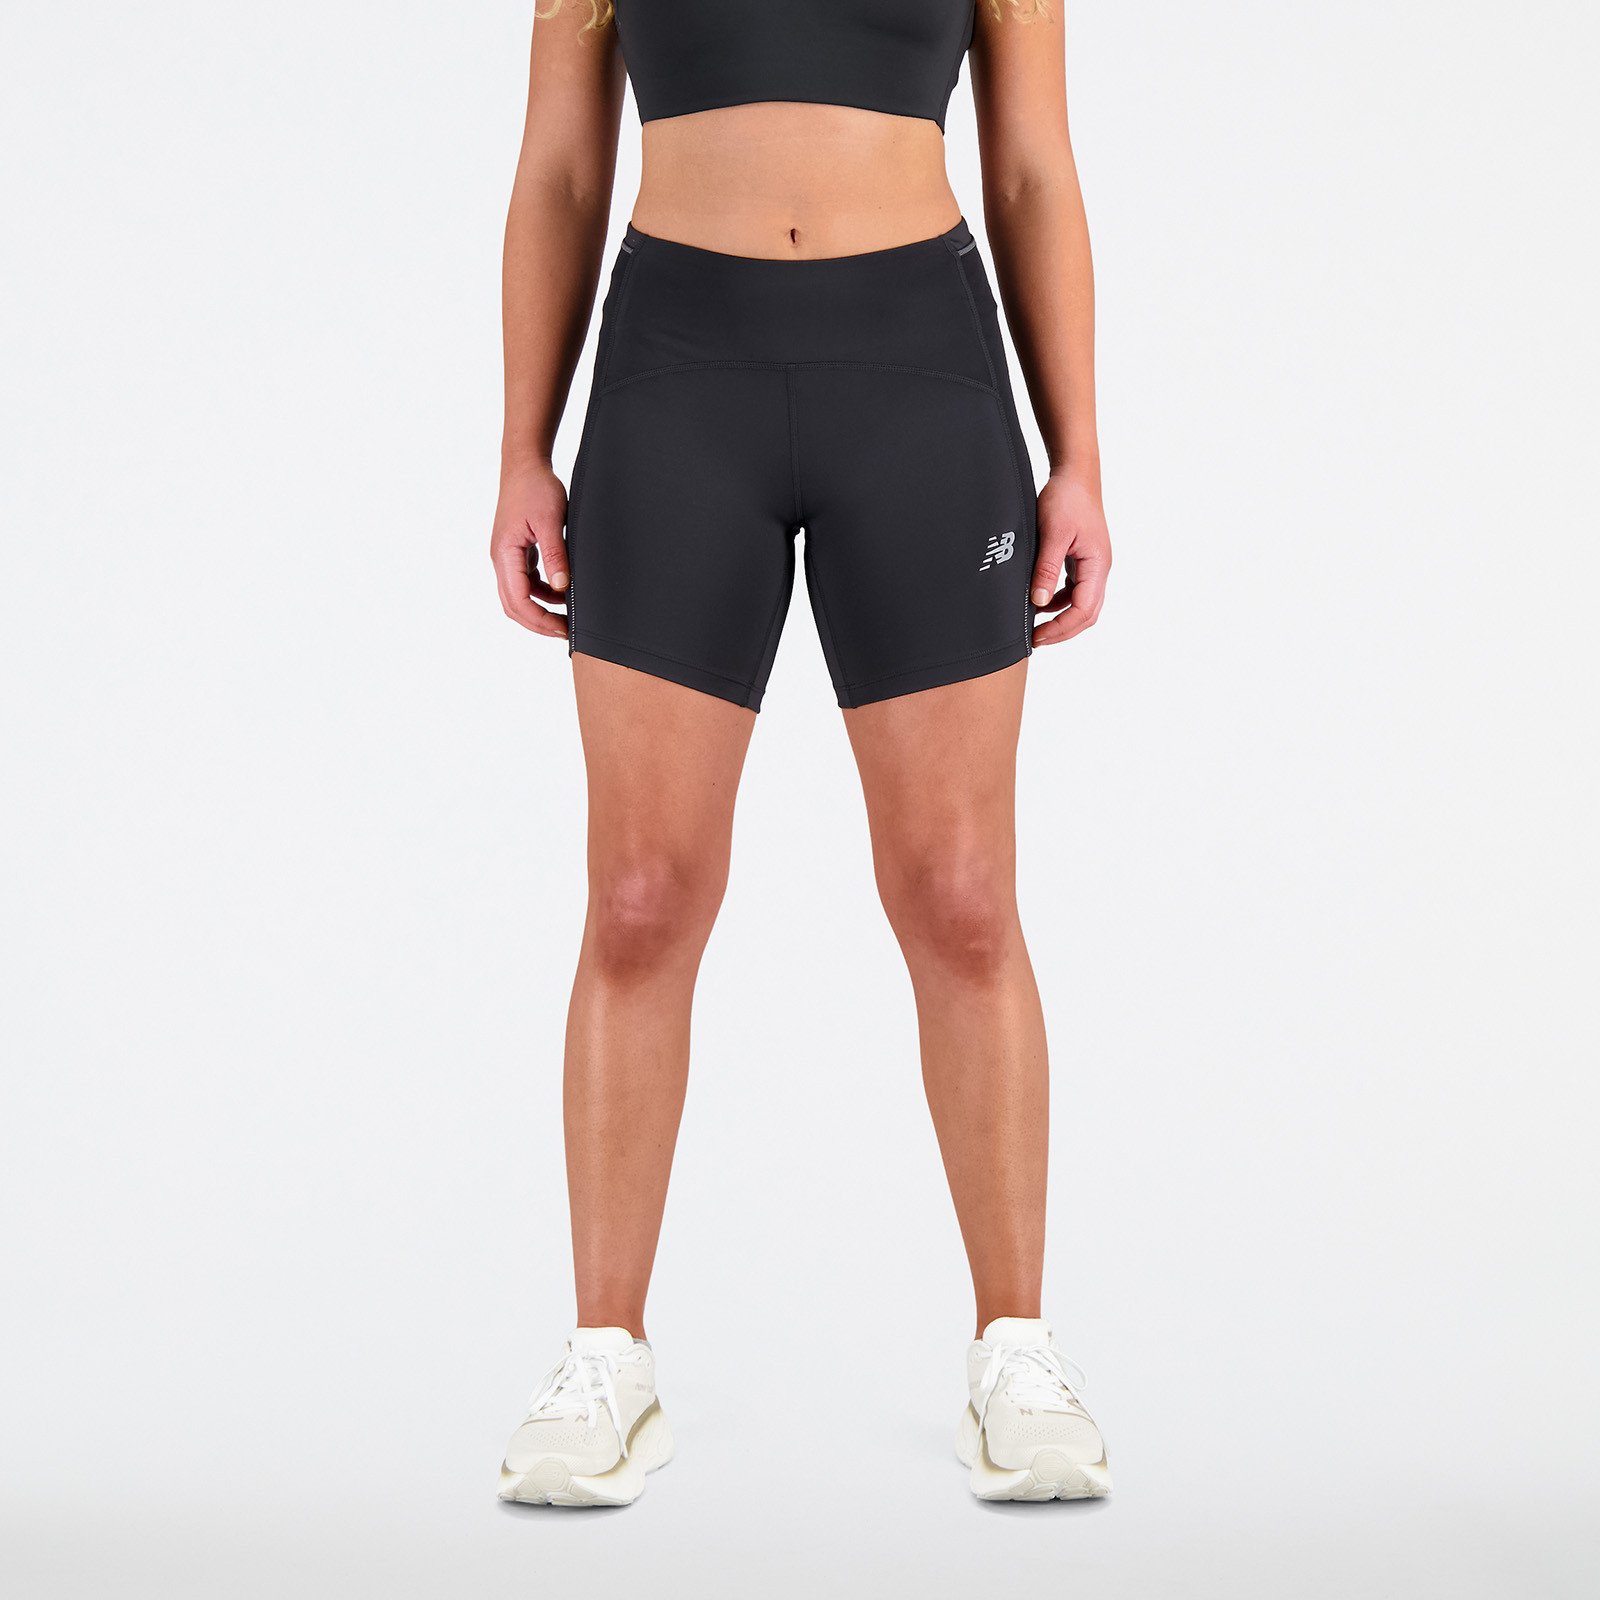 New Balance Impact Run Fitted Shorts Dame